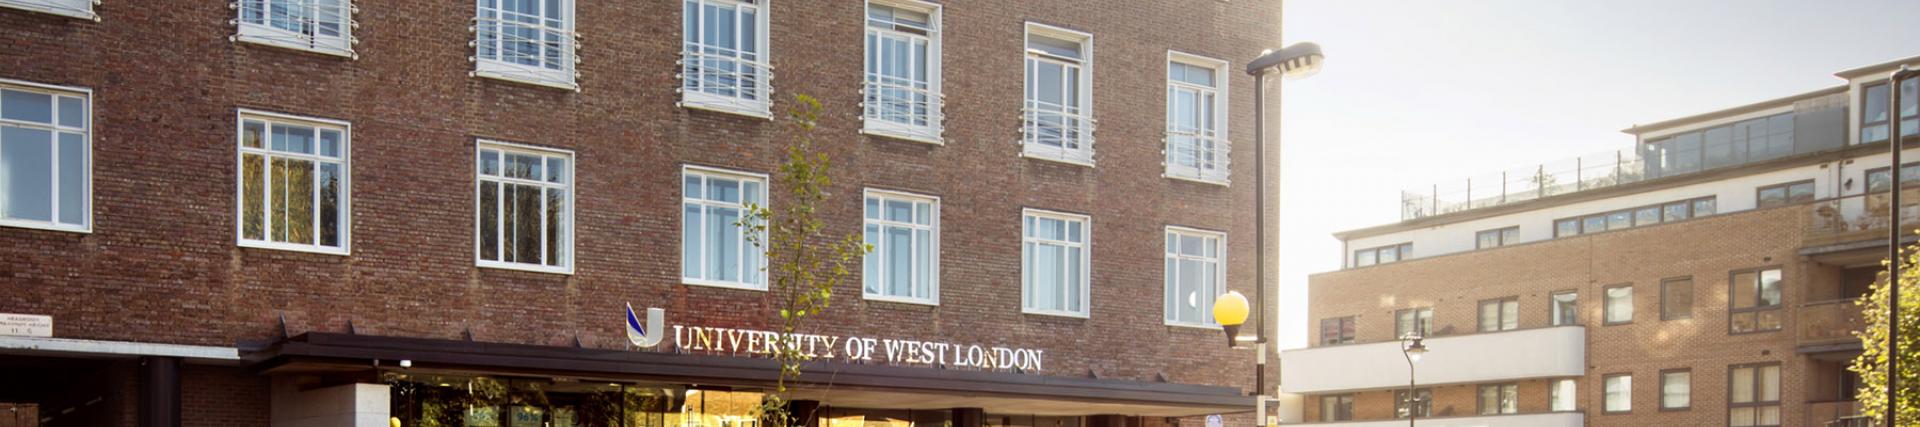 The front entrance to the University of West London, Ealing site